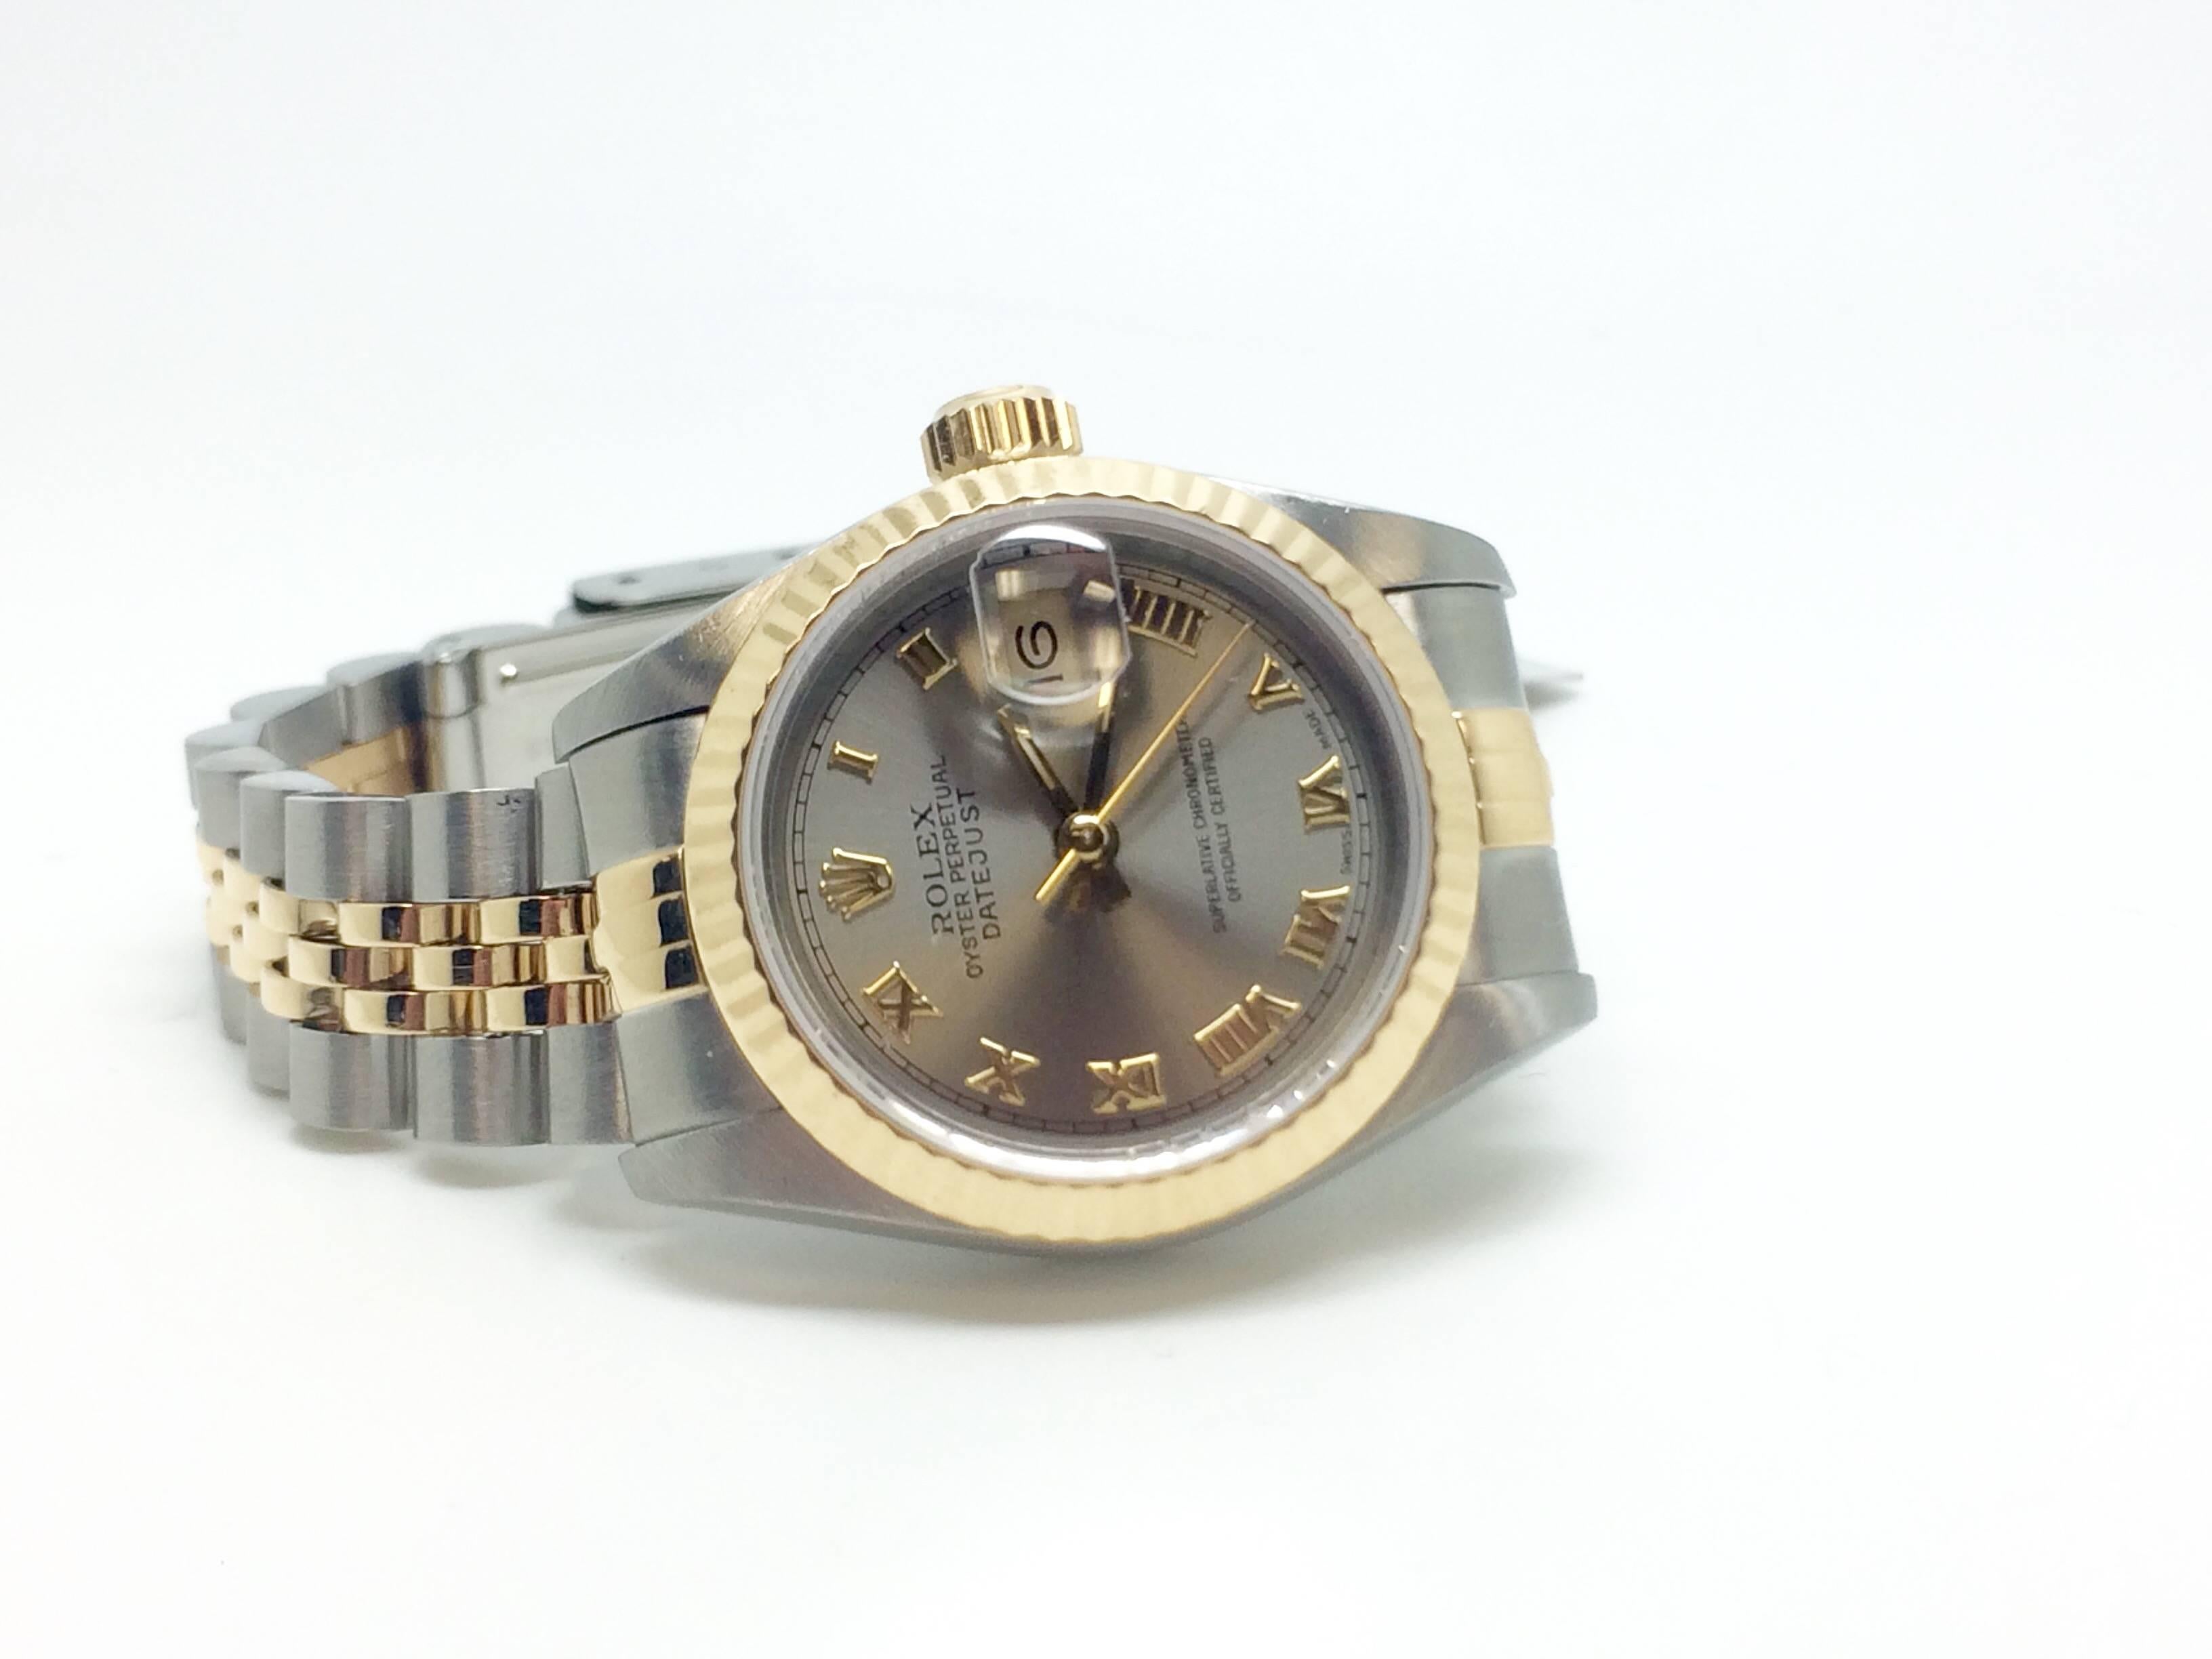 Rolex lady's estate wristwatch. This is a 26mm, circa 1991, Ref. 69173.  Two tone stainless steel and 18kt yellow gold jubilee bracelet with 18 links. Approximately 6.5 inches inside wrist measurement. The dial colour is steel with yellow gold roman